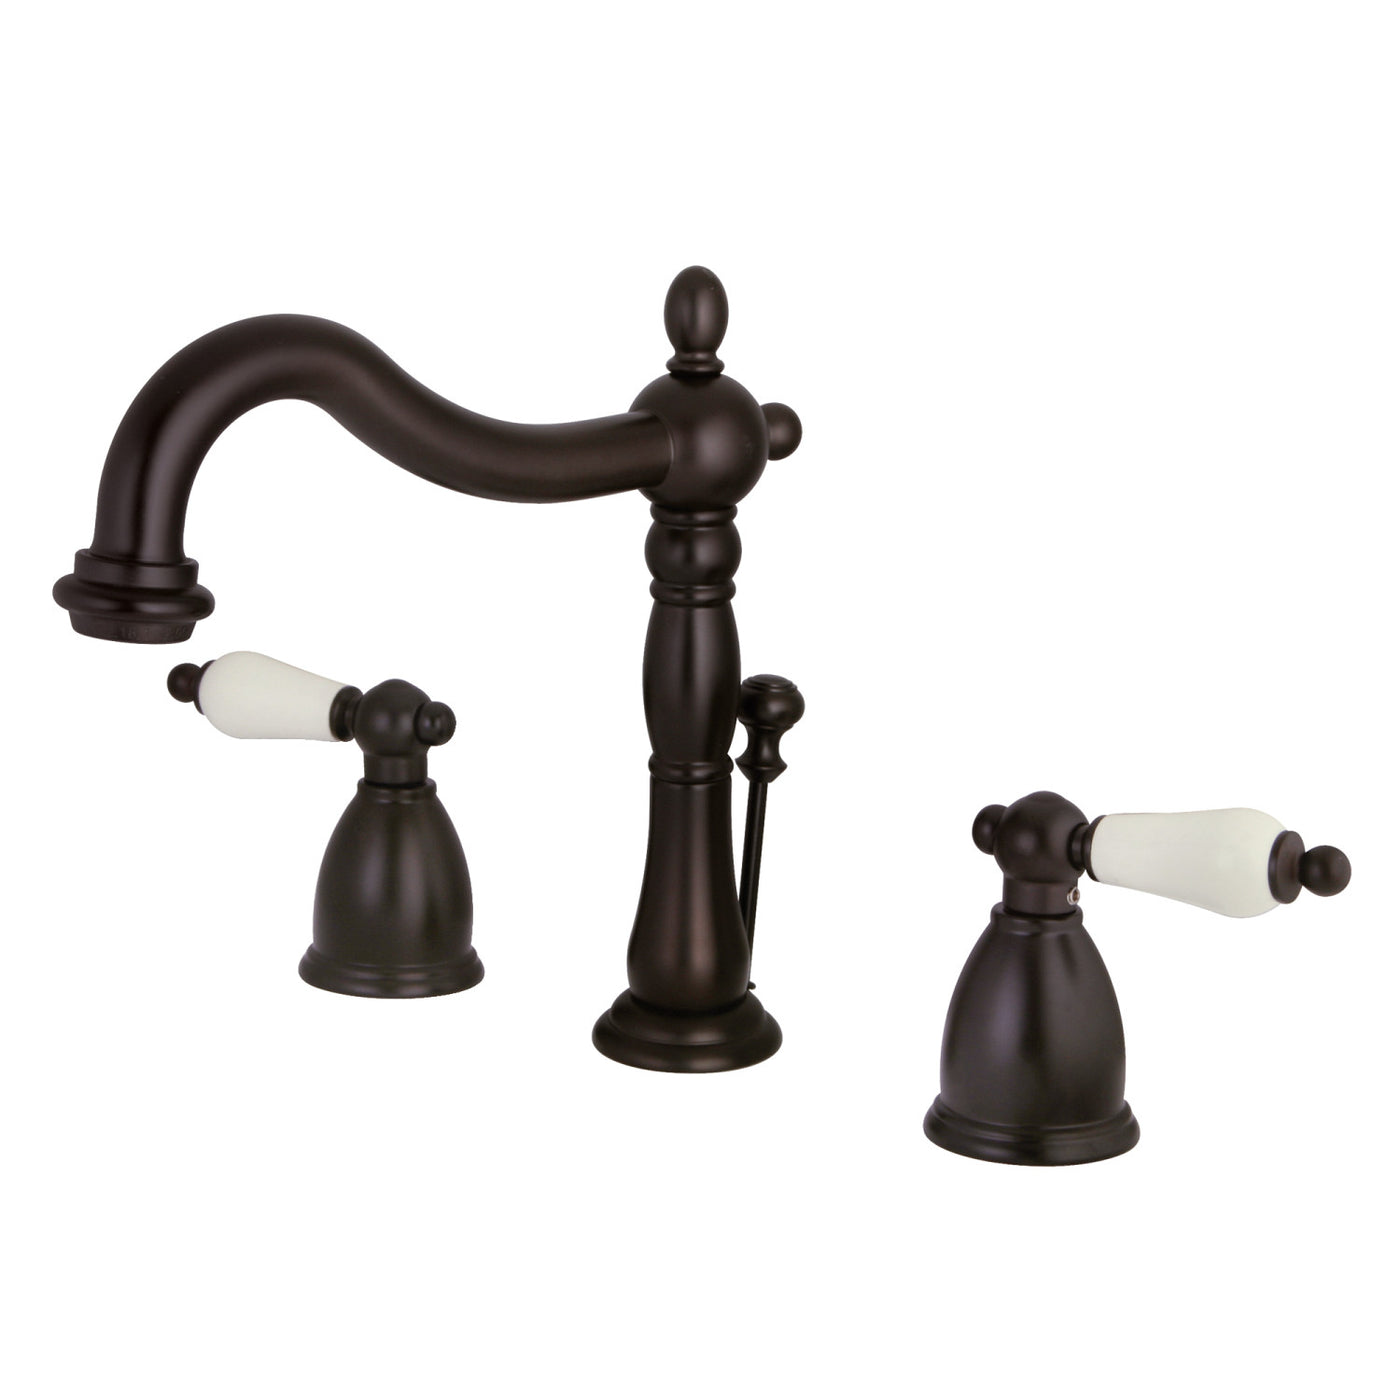 Elements of Design EB1975PL Widespread Bathroom Faucet with Plastic Pop-Up, Oil Rubbed Bronze